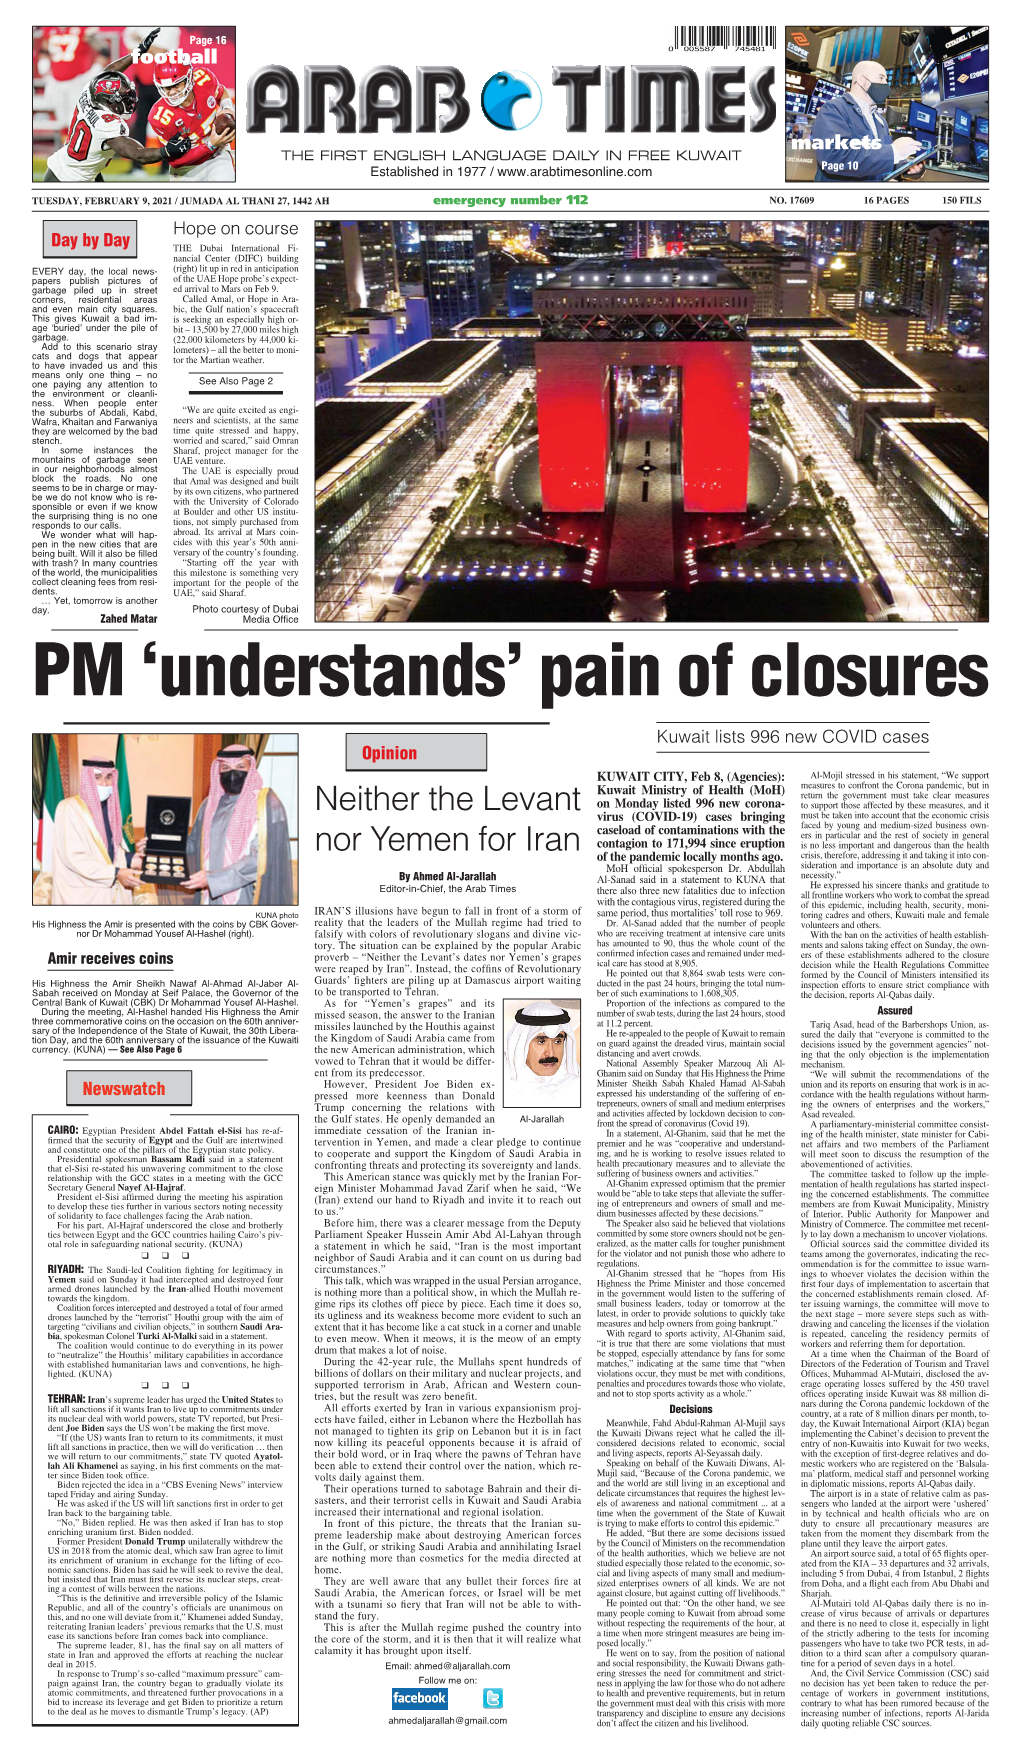 PM ‘Understands’ Pain of Closures